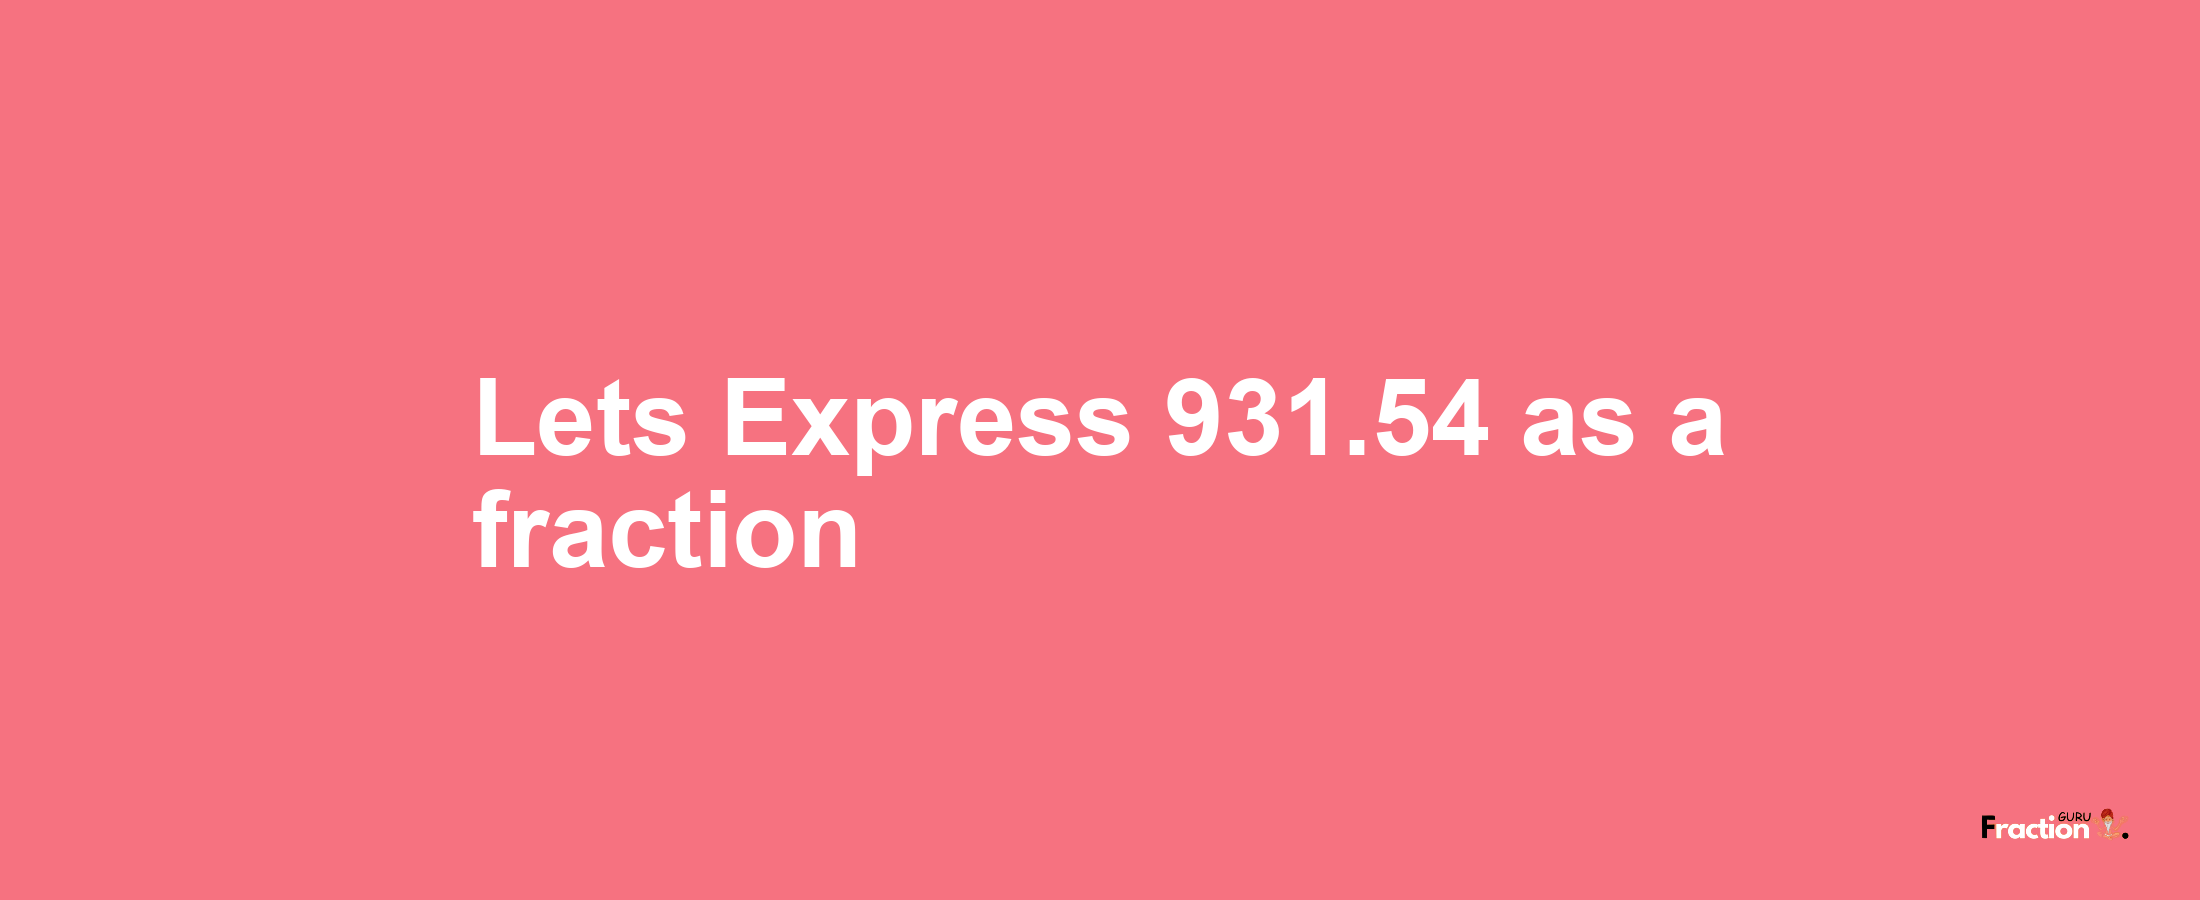 Lets Express 931.54 as afraction